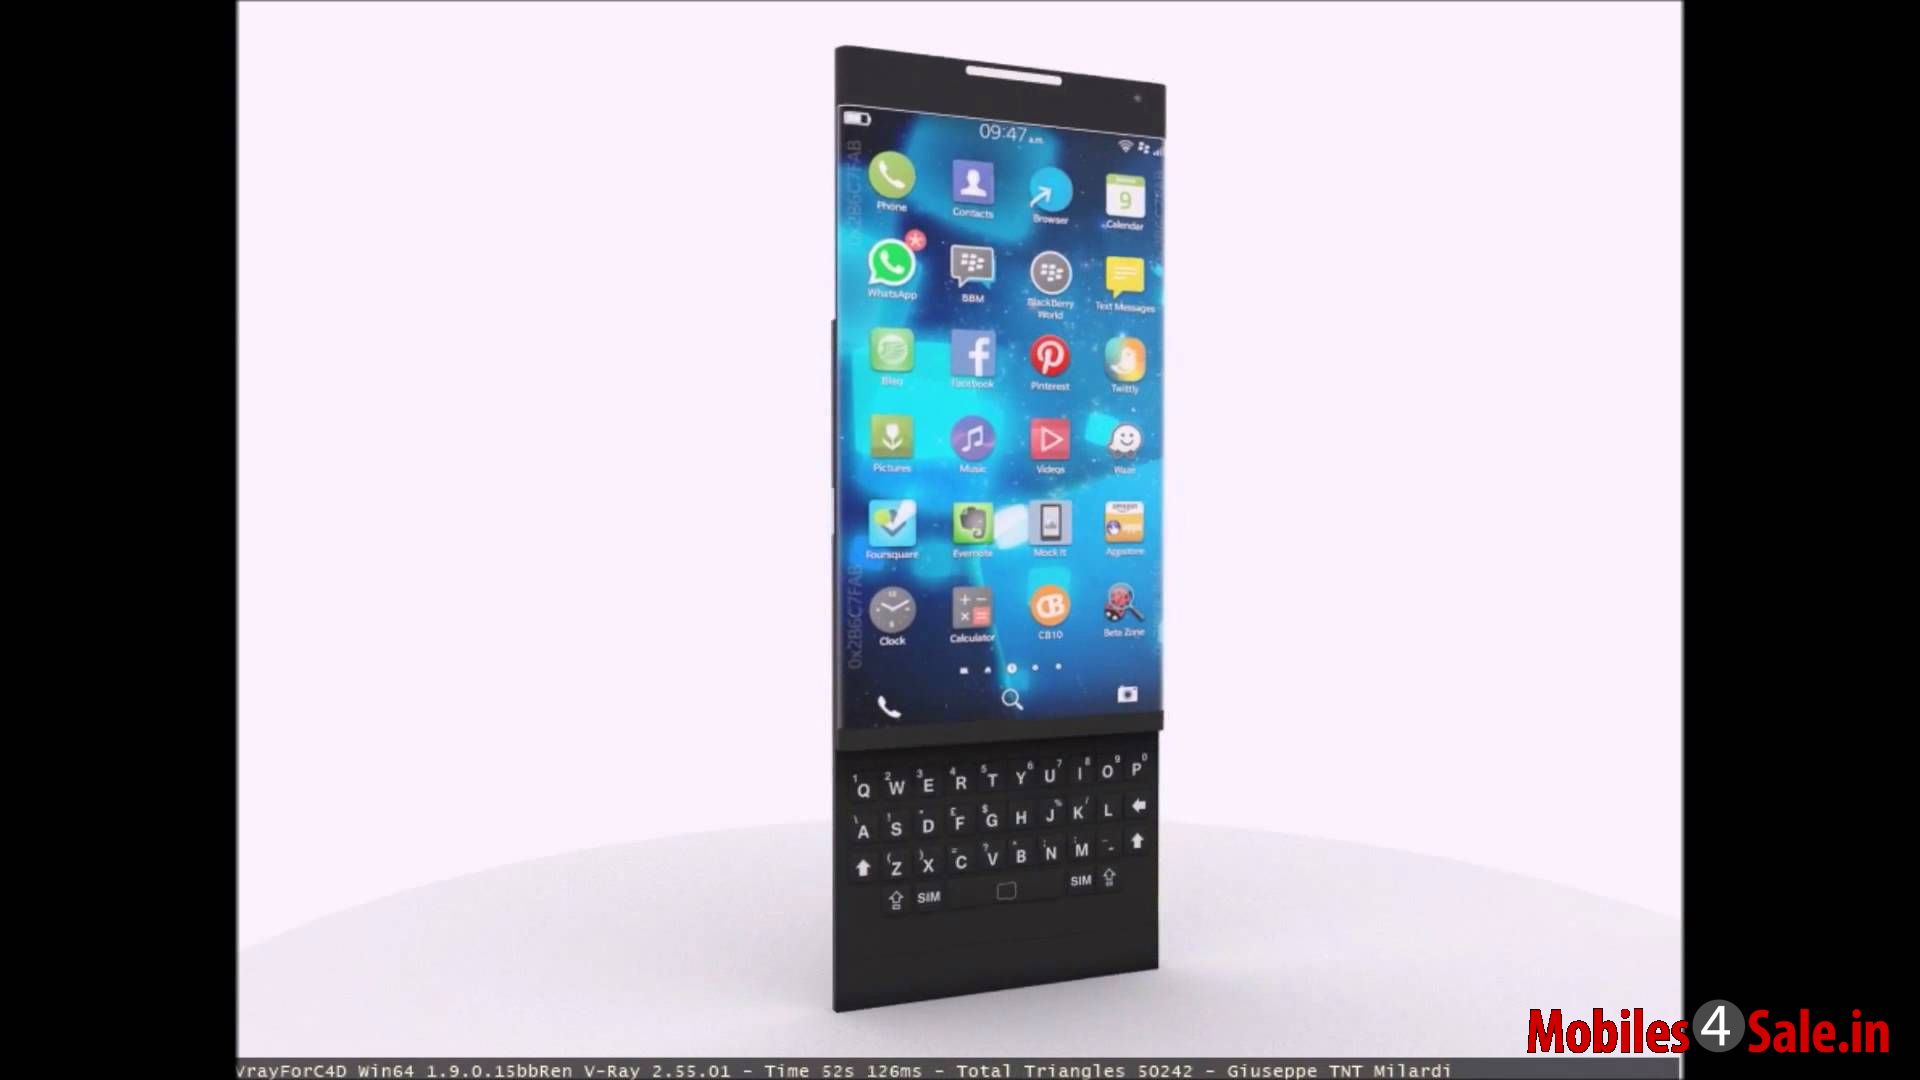 Blackberry Venice With Pyshical Keyboard